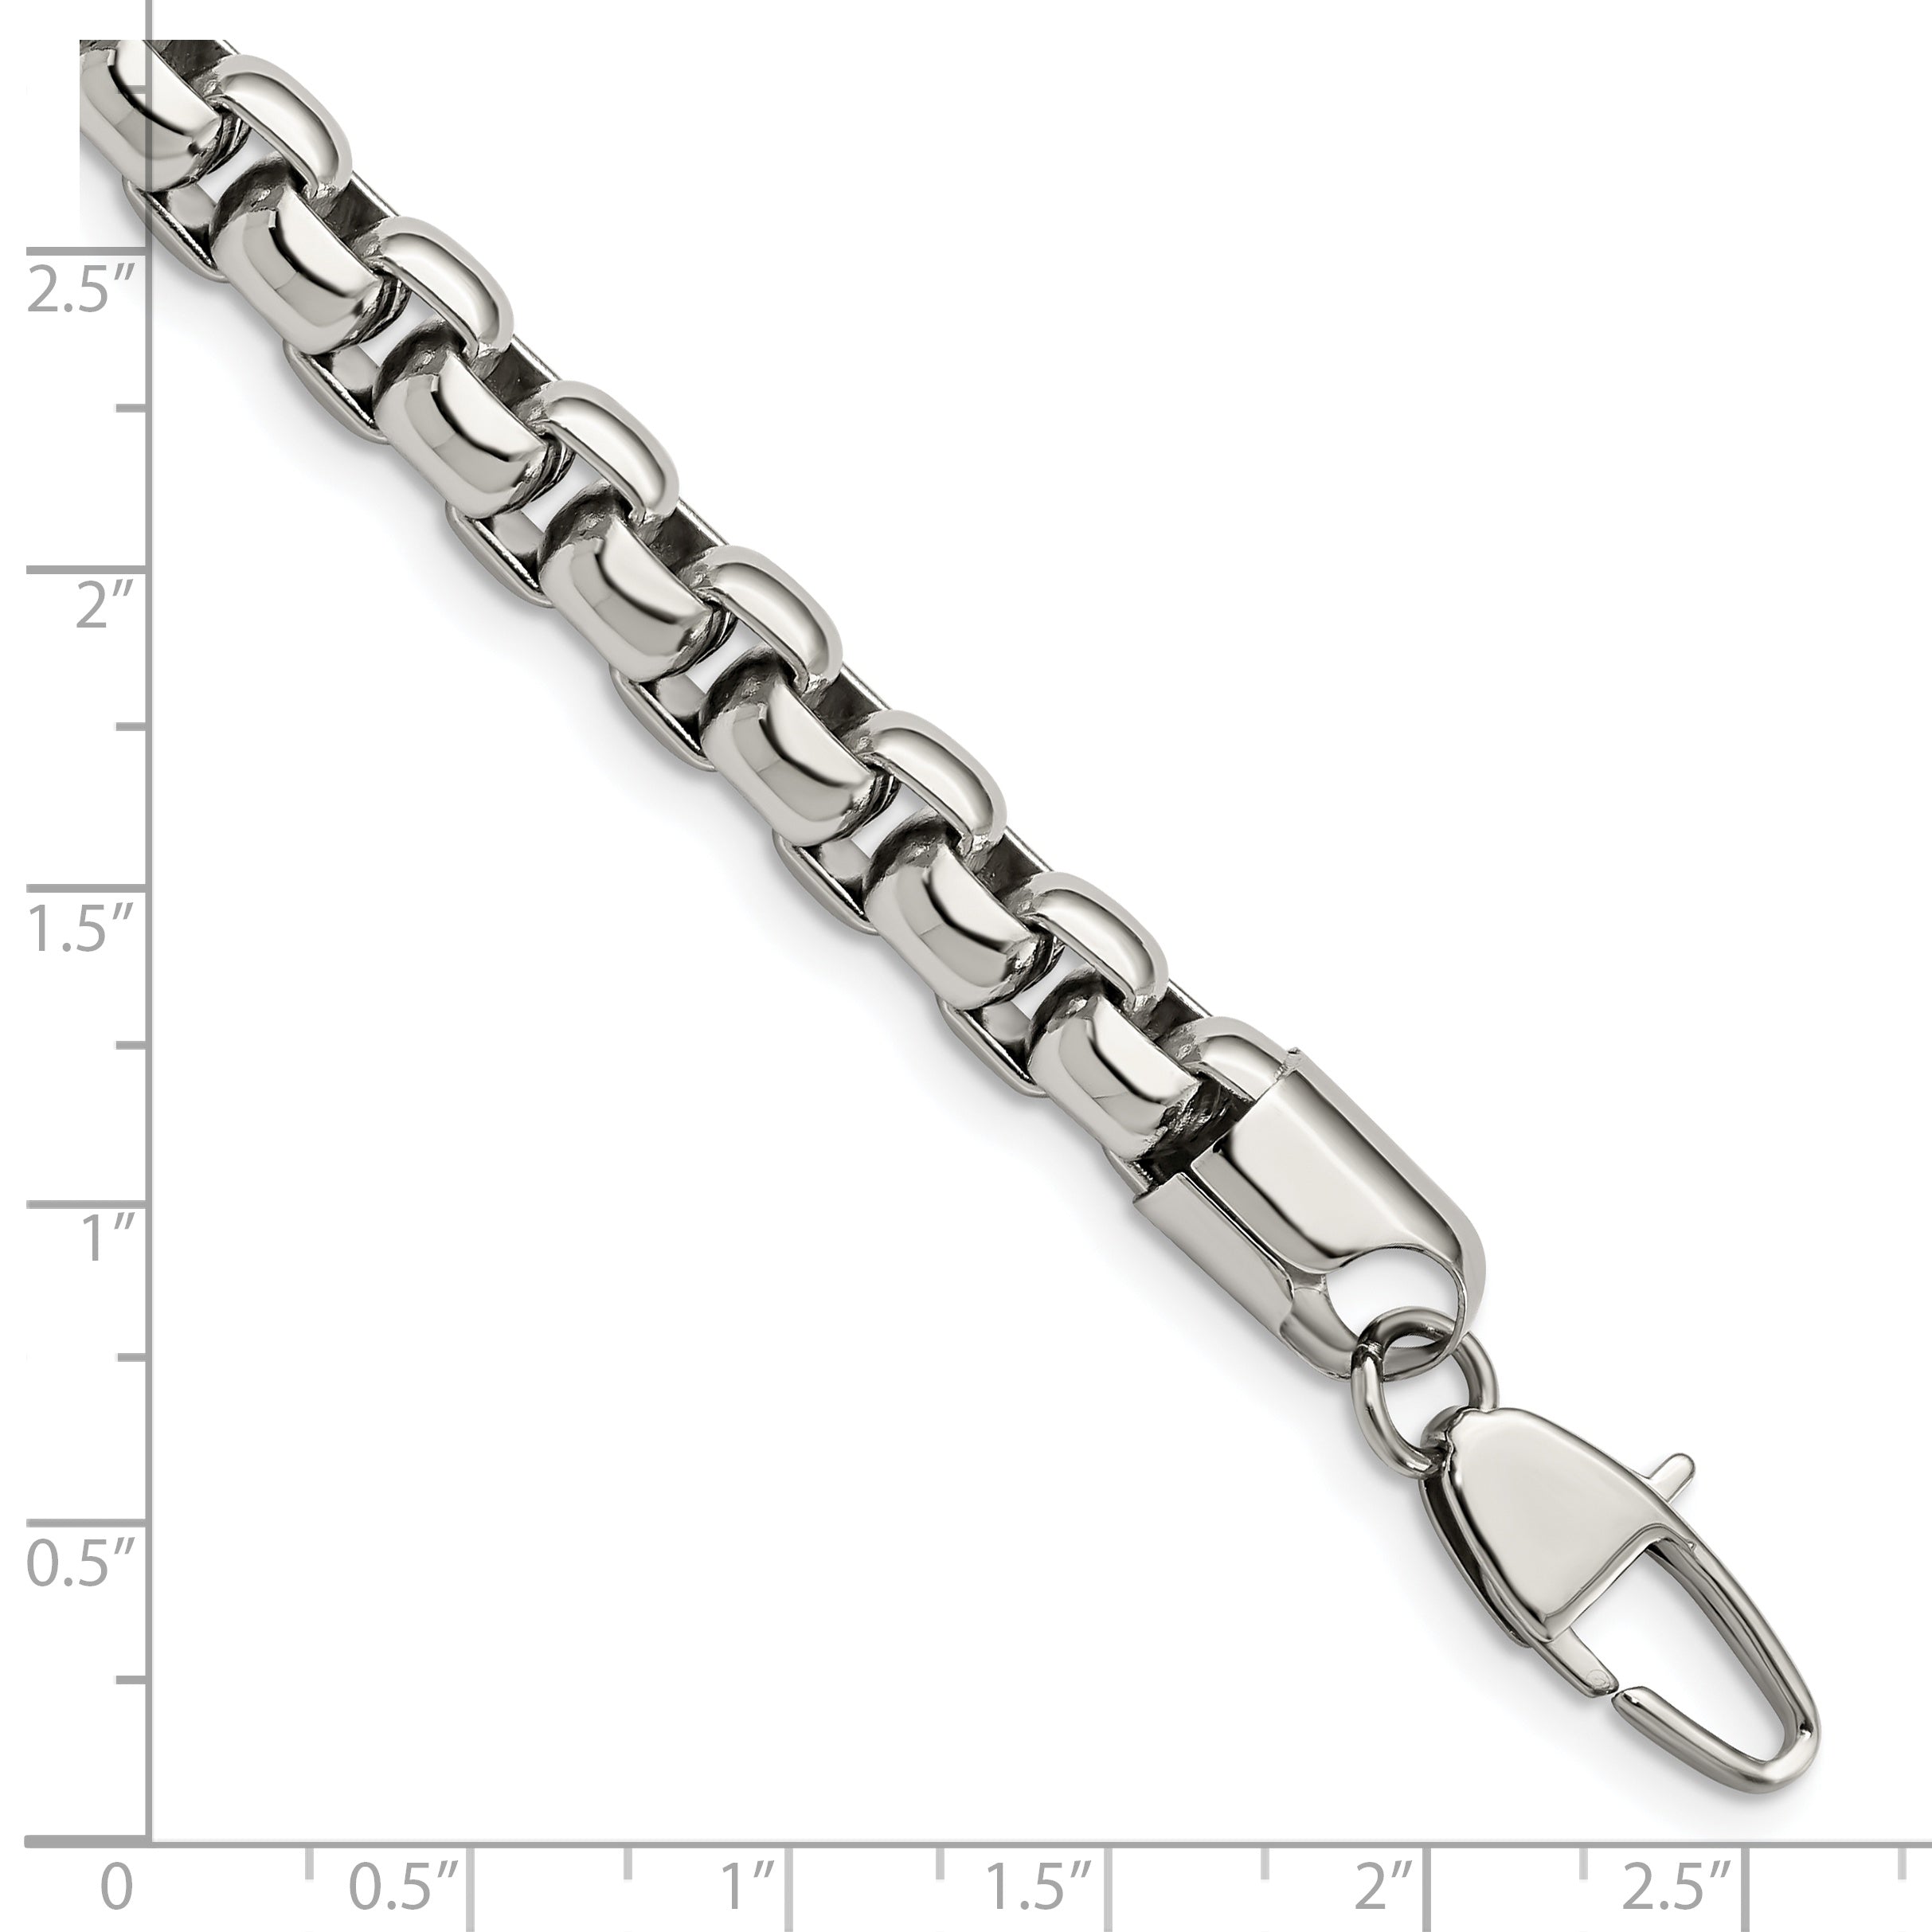 Chisel Stainless Steel Polished 9 inch Rounded Box Bracelet